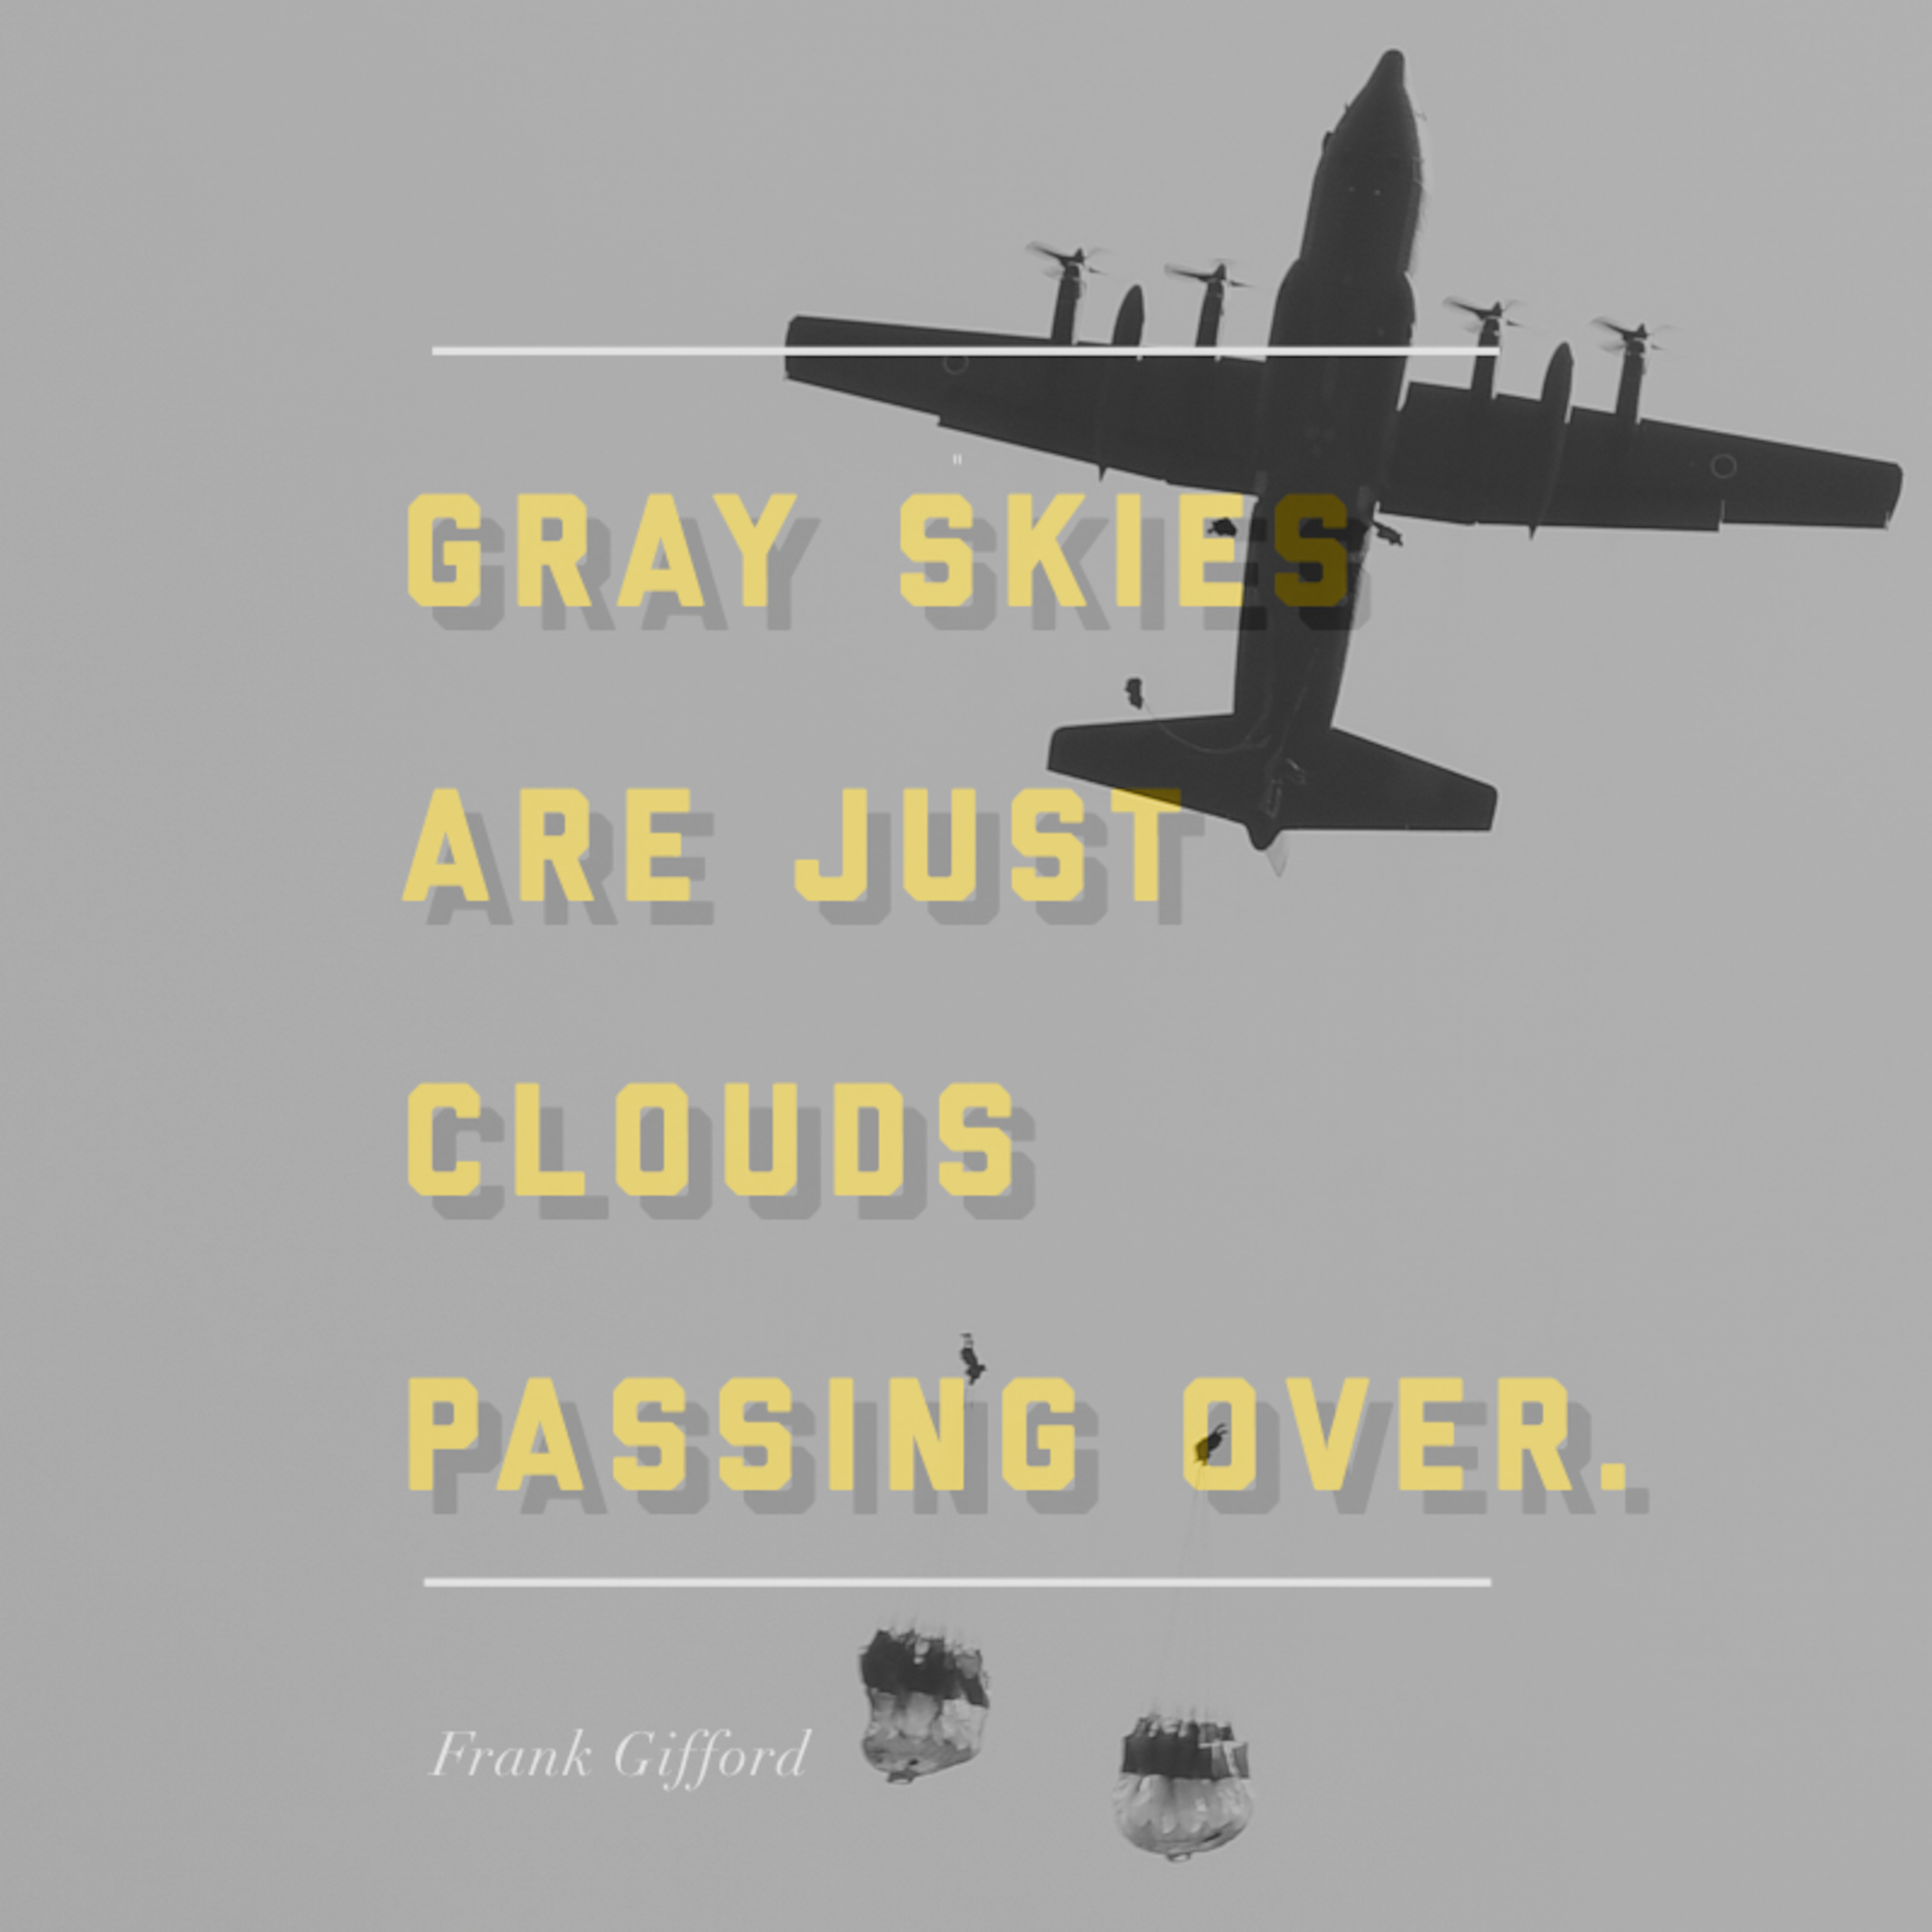 This week's motivation is from Frank Gifford, a football player and sports commentator: 

"Gray skies are just clouds passing over."

(U.S. Air Force graphic/Tech. Sgt. Andrew Park)